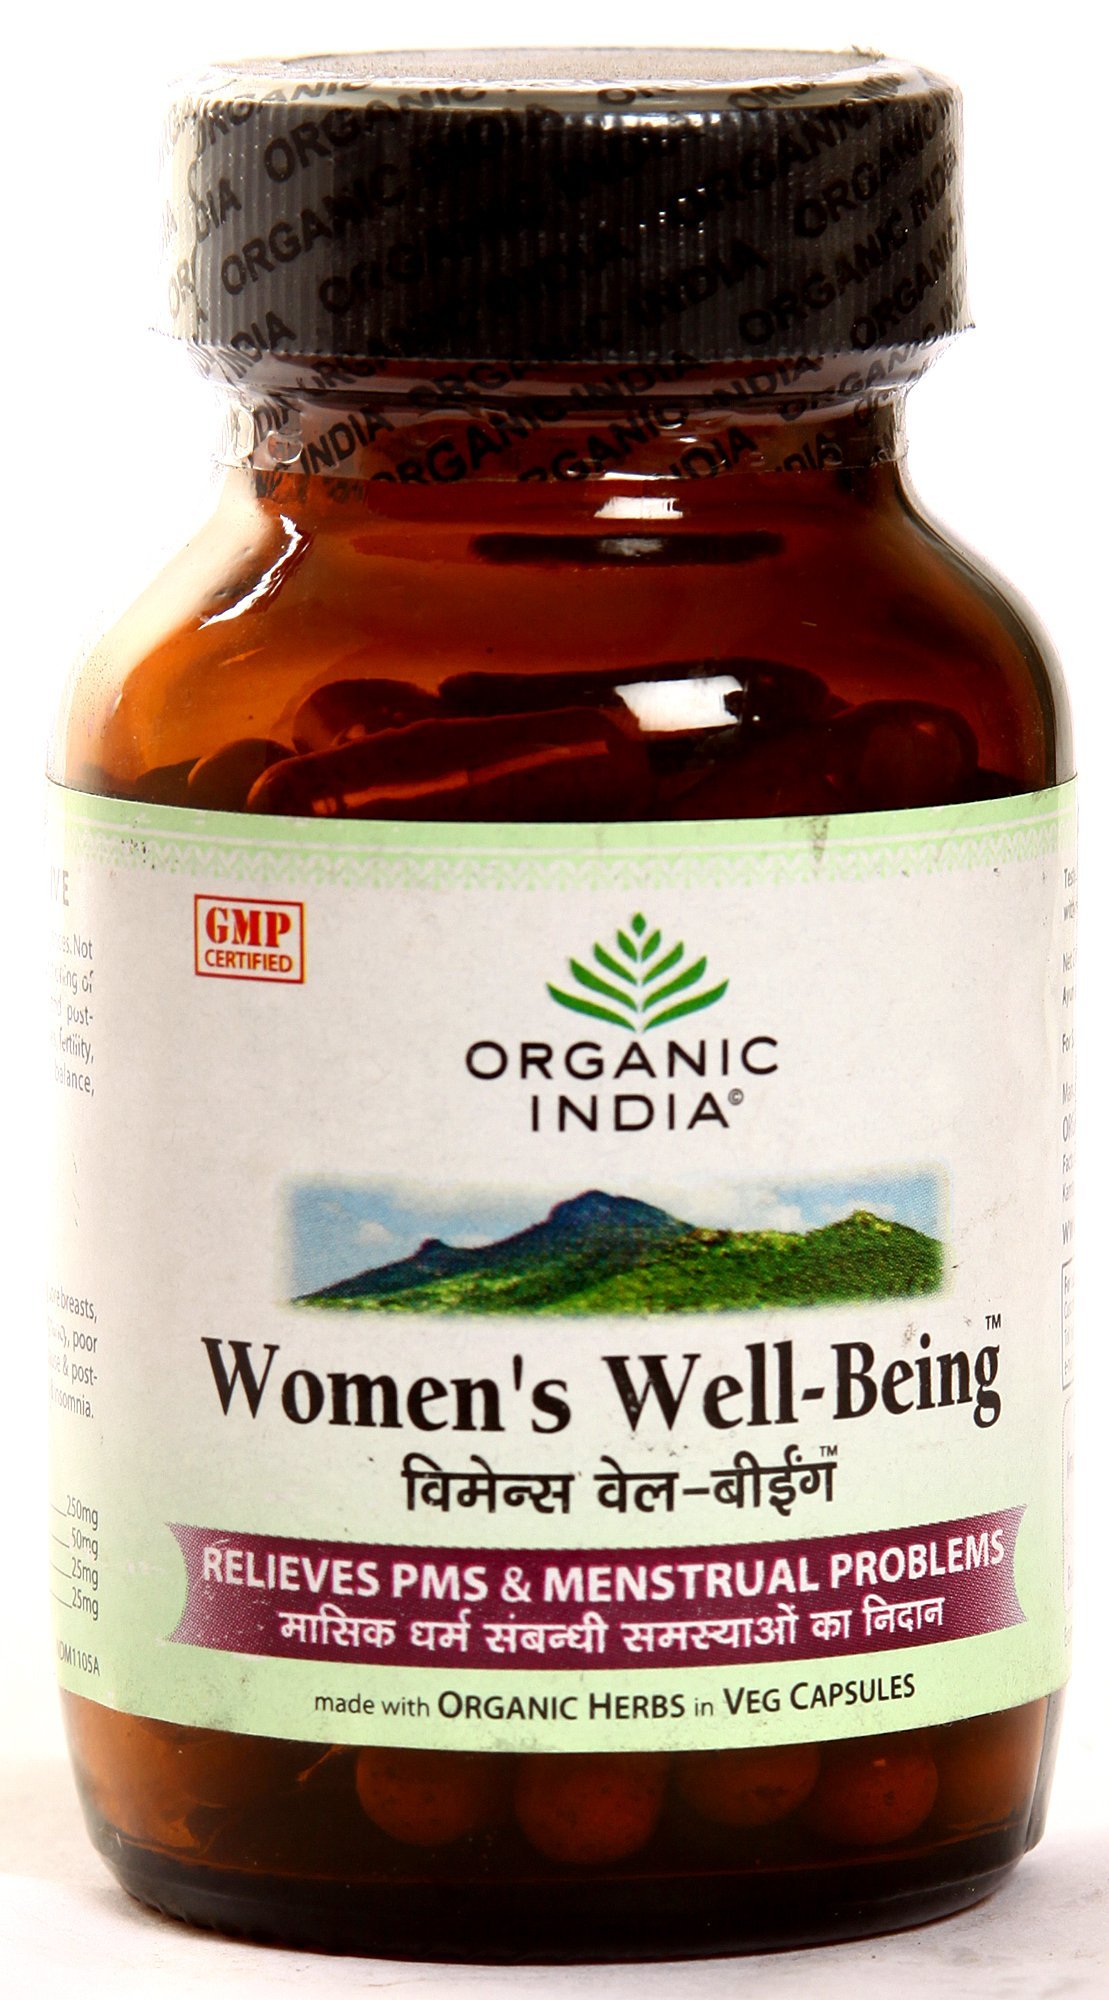 Women's Well-Being - book cover